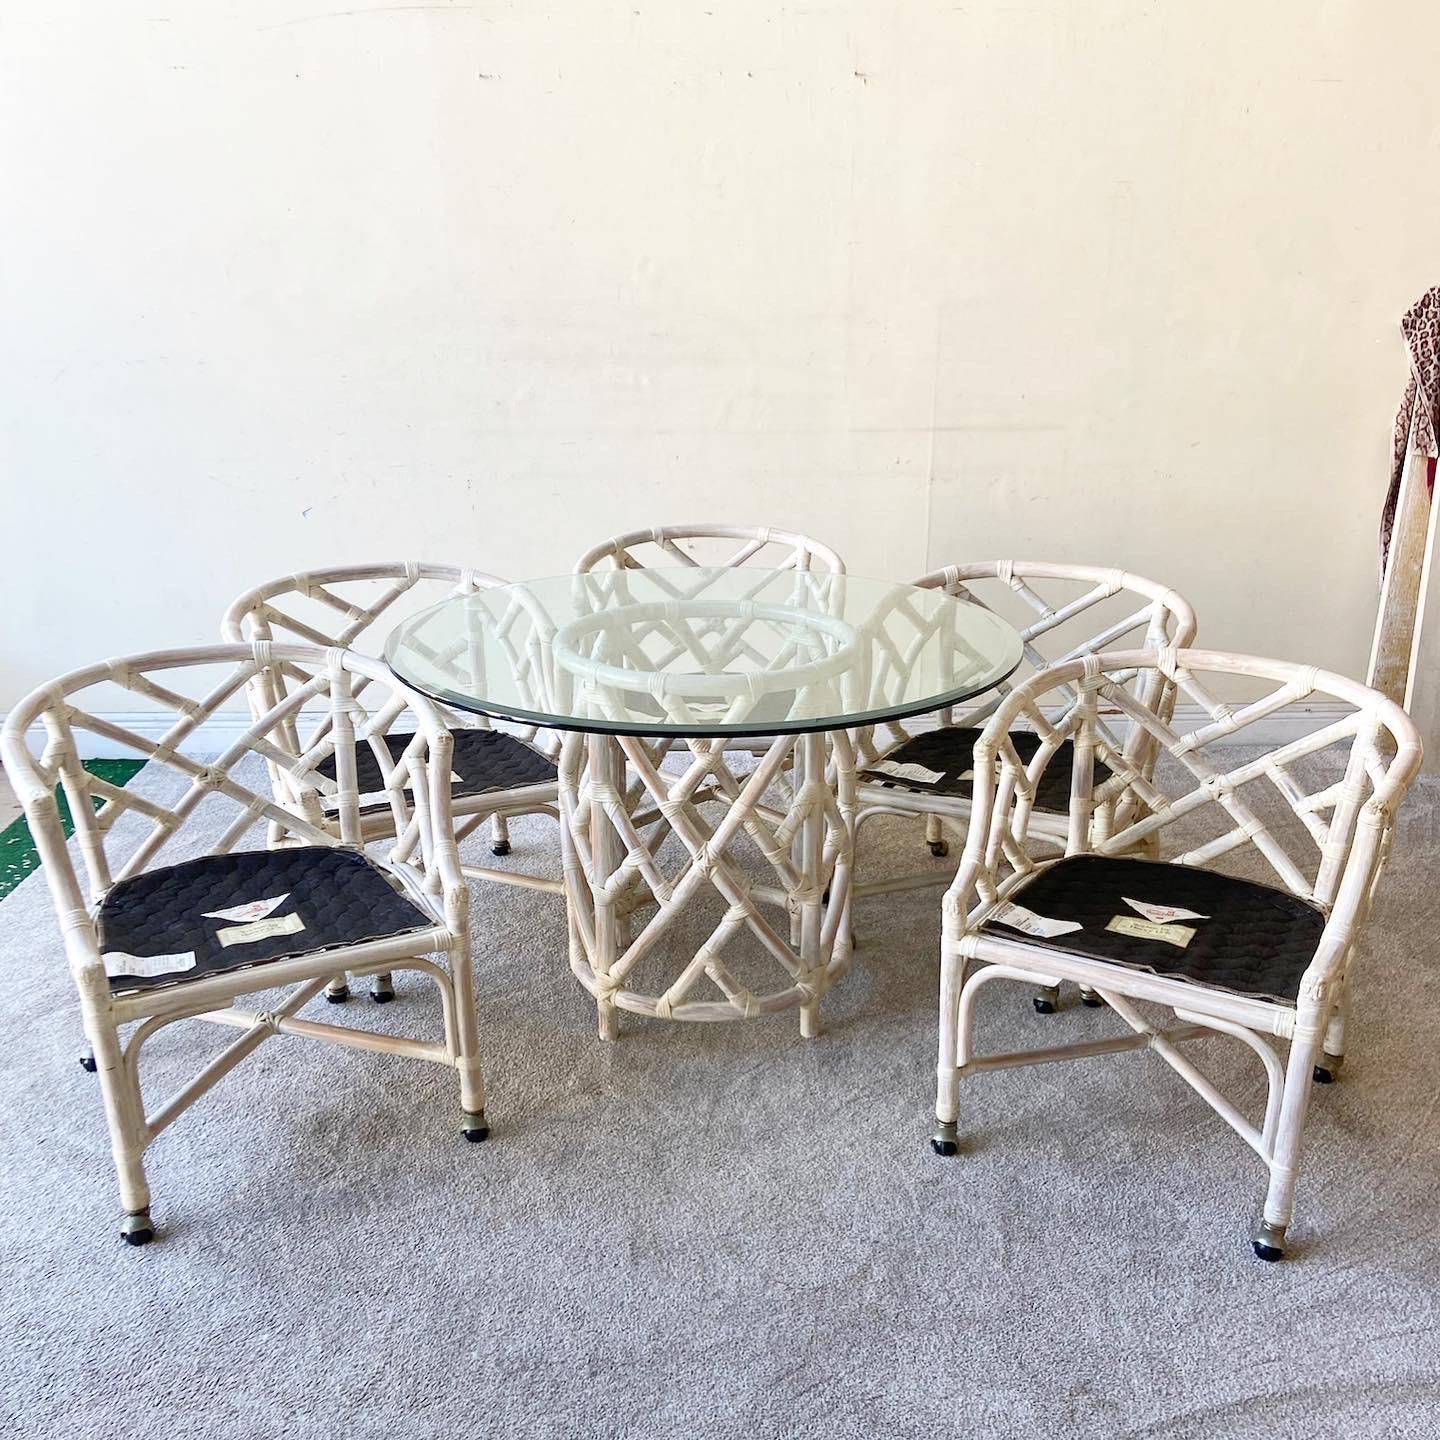 Amazing vintage boho chic circular glass top dining table by Henry Link. Features a fantastic bamboo rattan chippendale pedestal base.

Table measures 44”W, 44”D, 28.5”